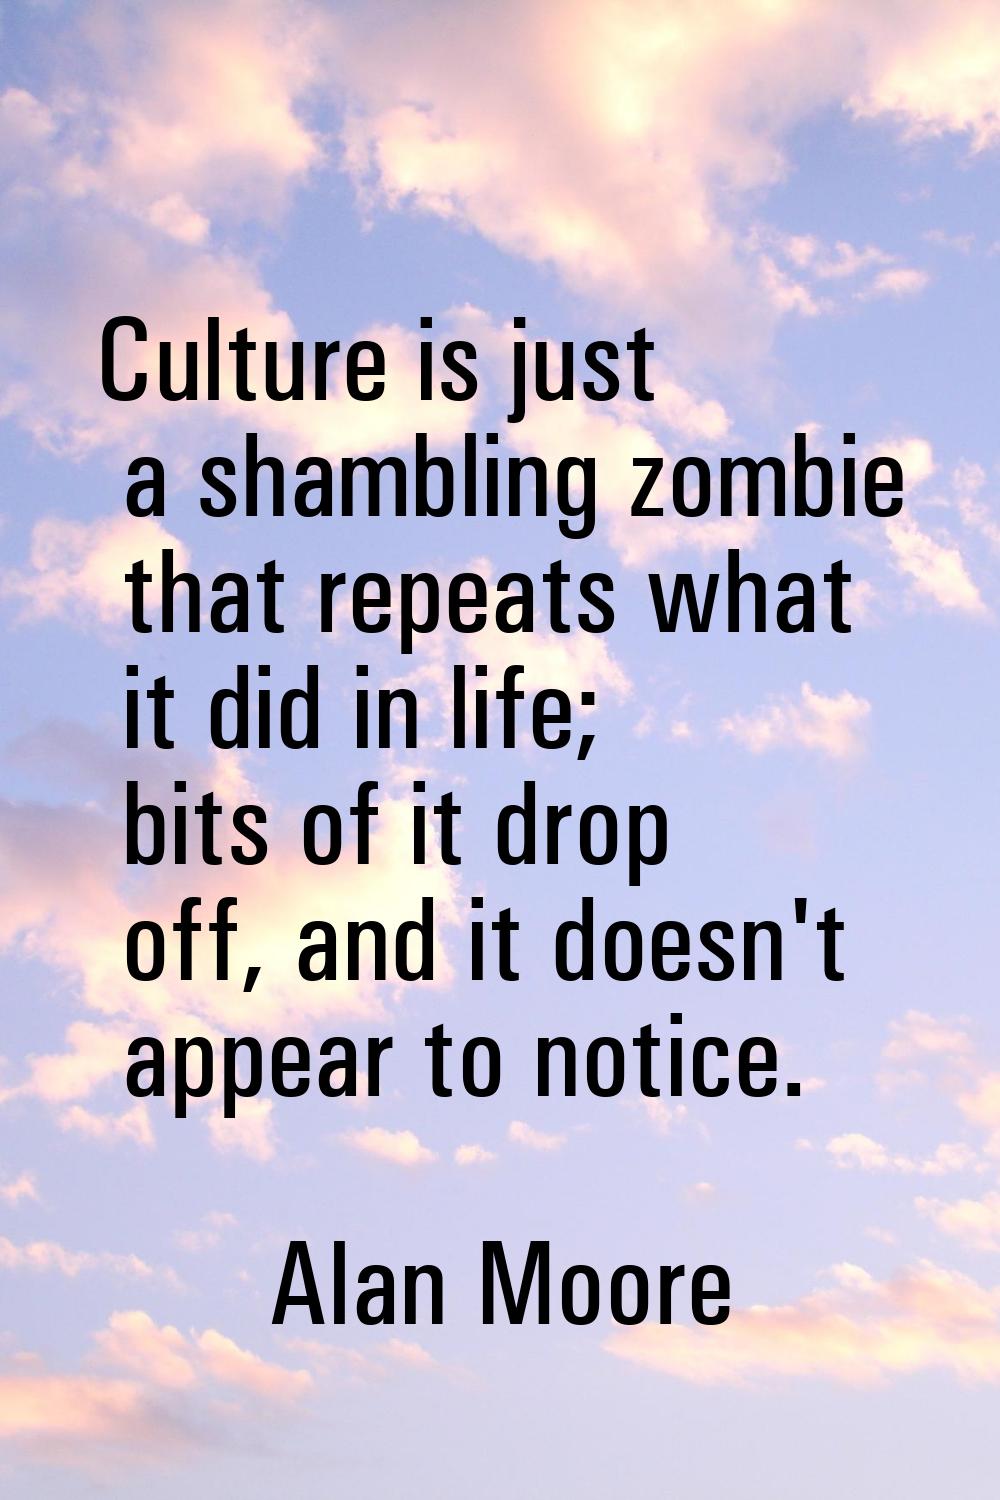 Culture is just a shambling zombie that repeats what it did in life; bits of it drop off, and it do